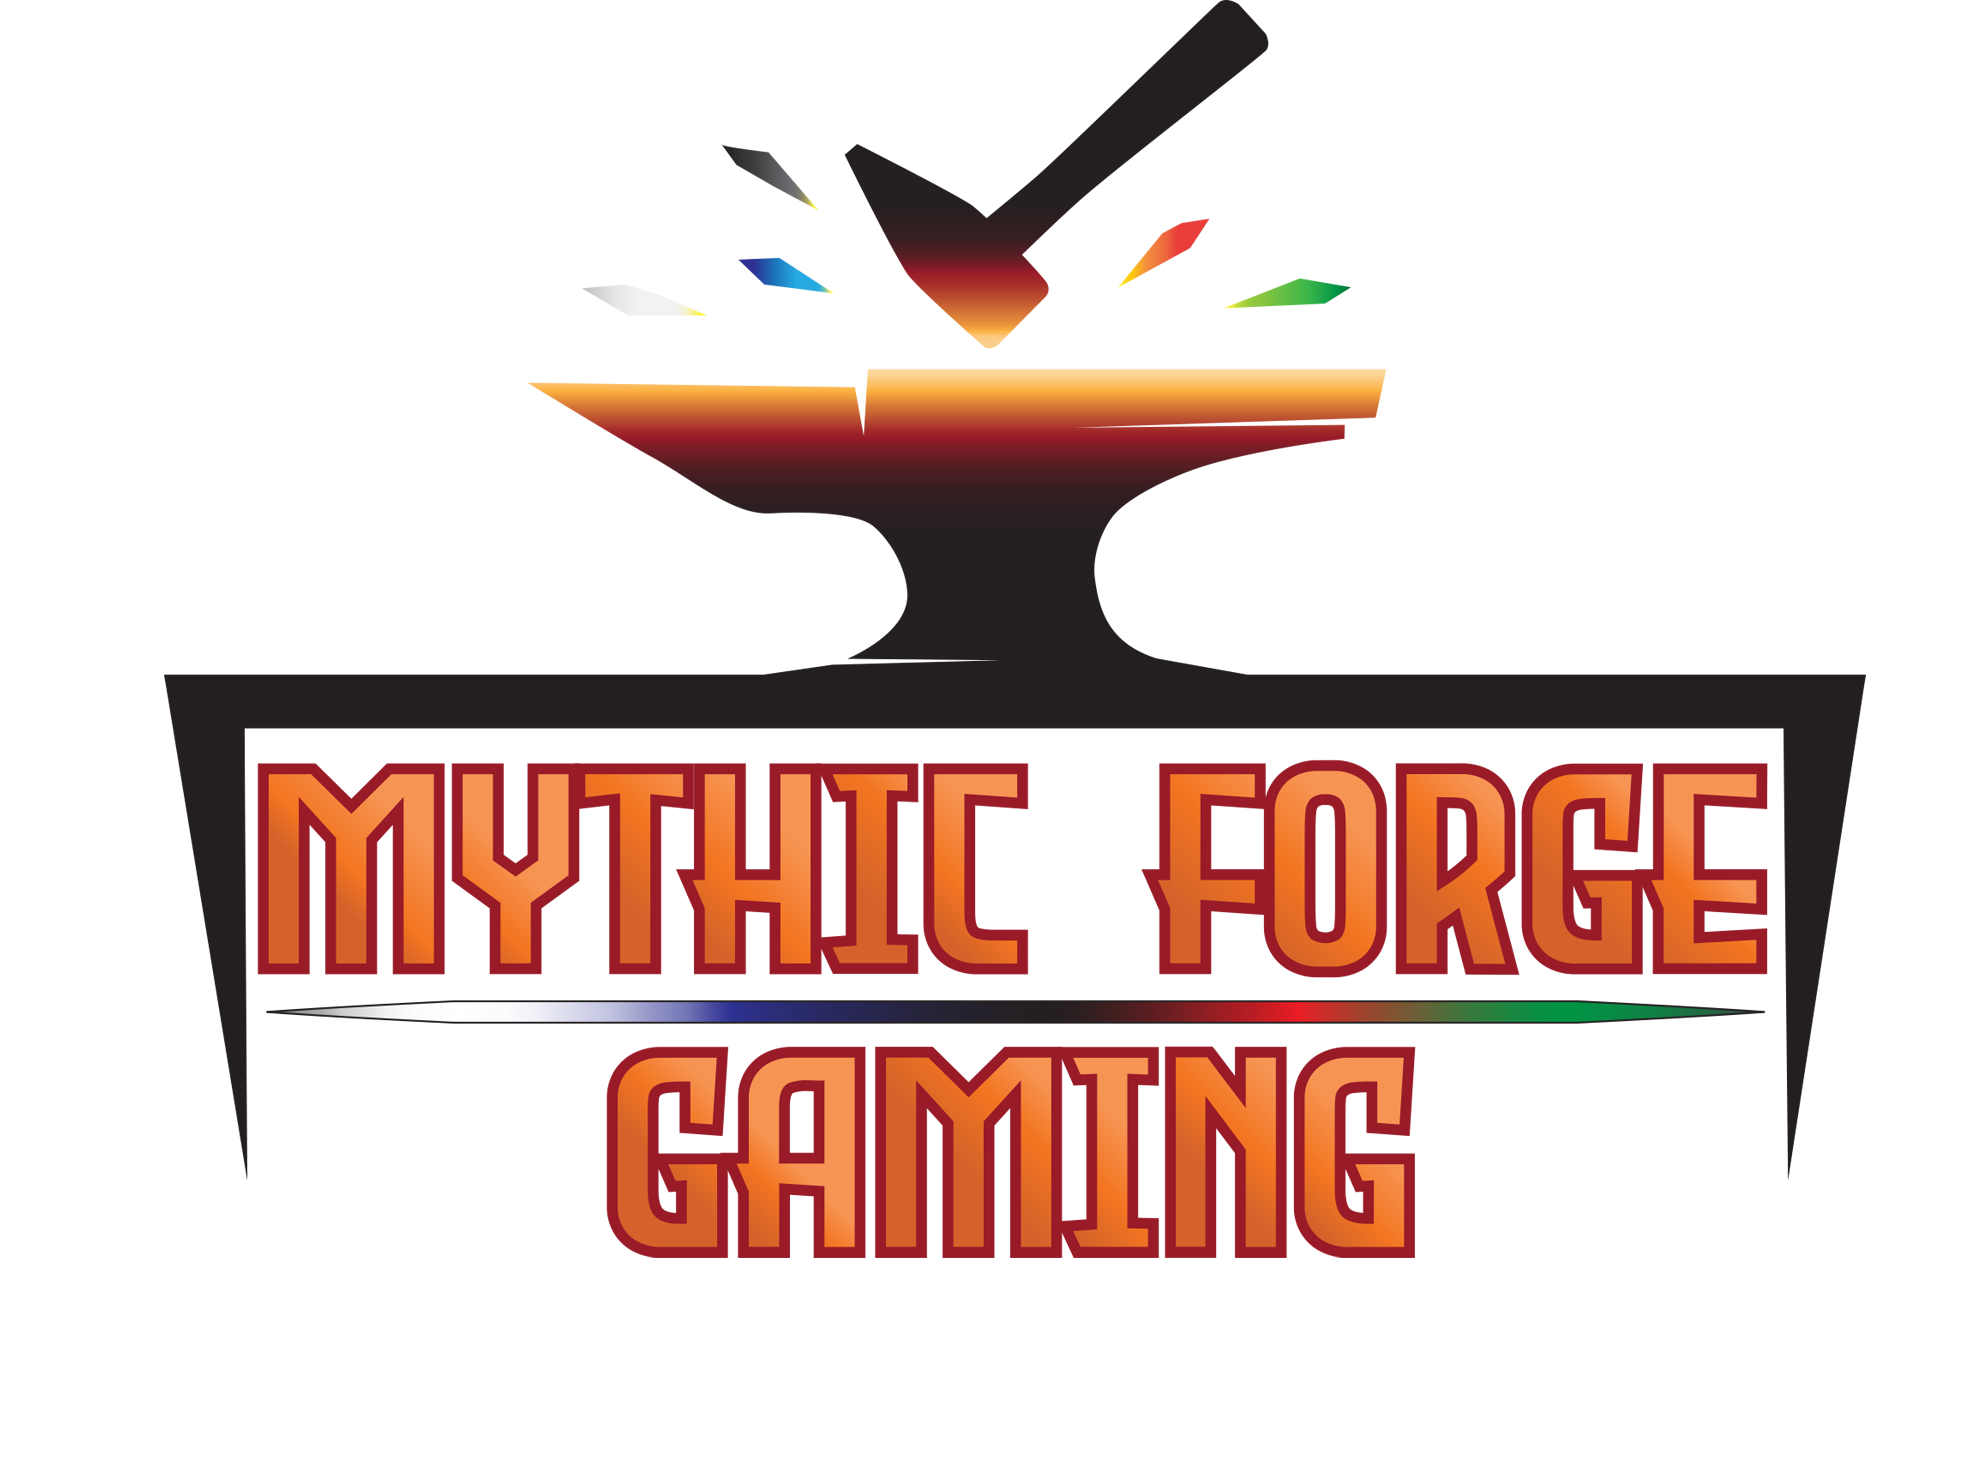 Mythic Forge Gaming